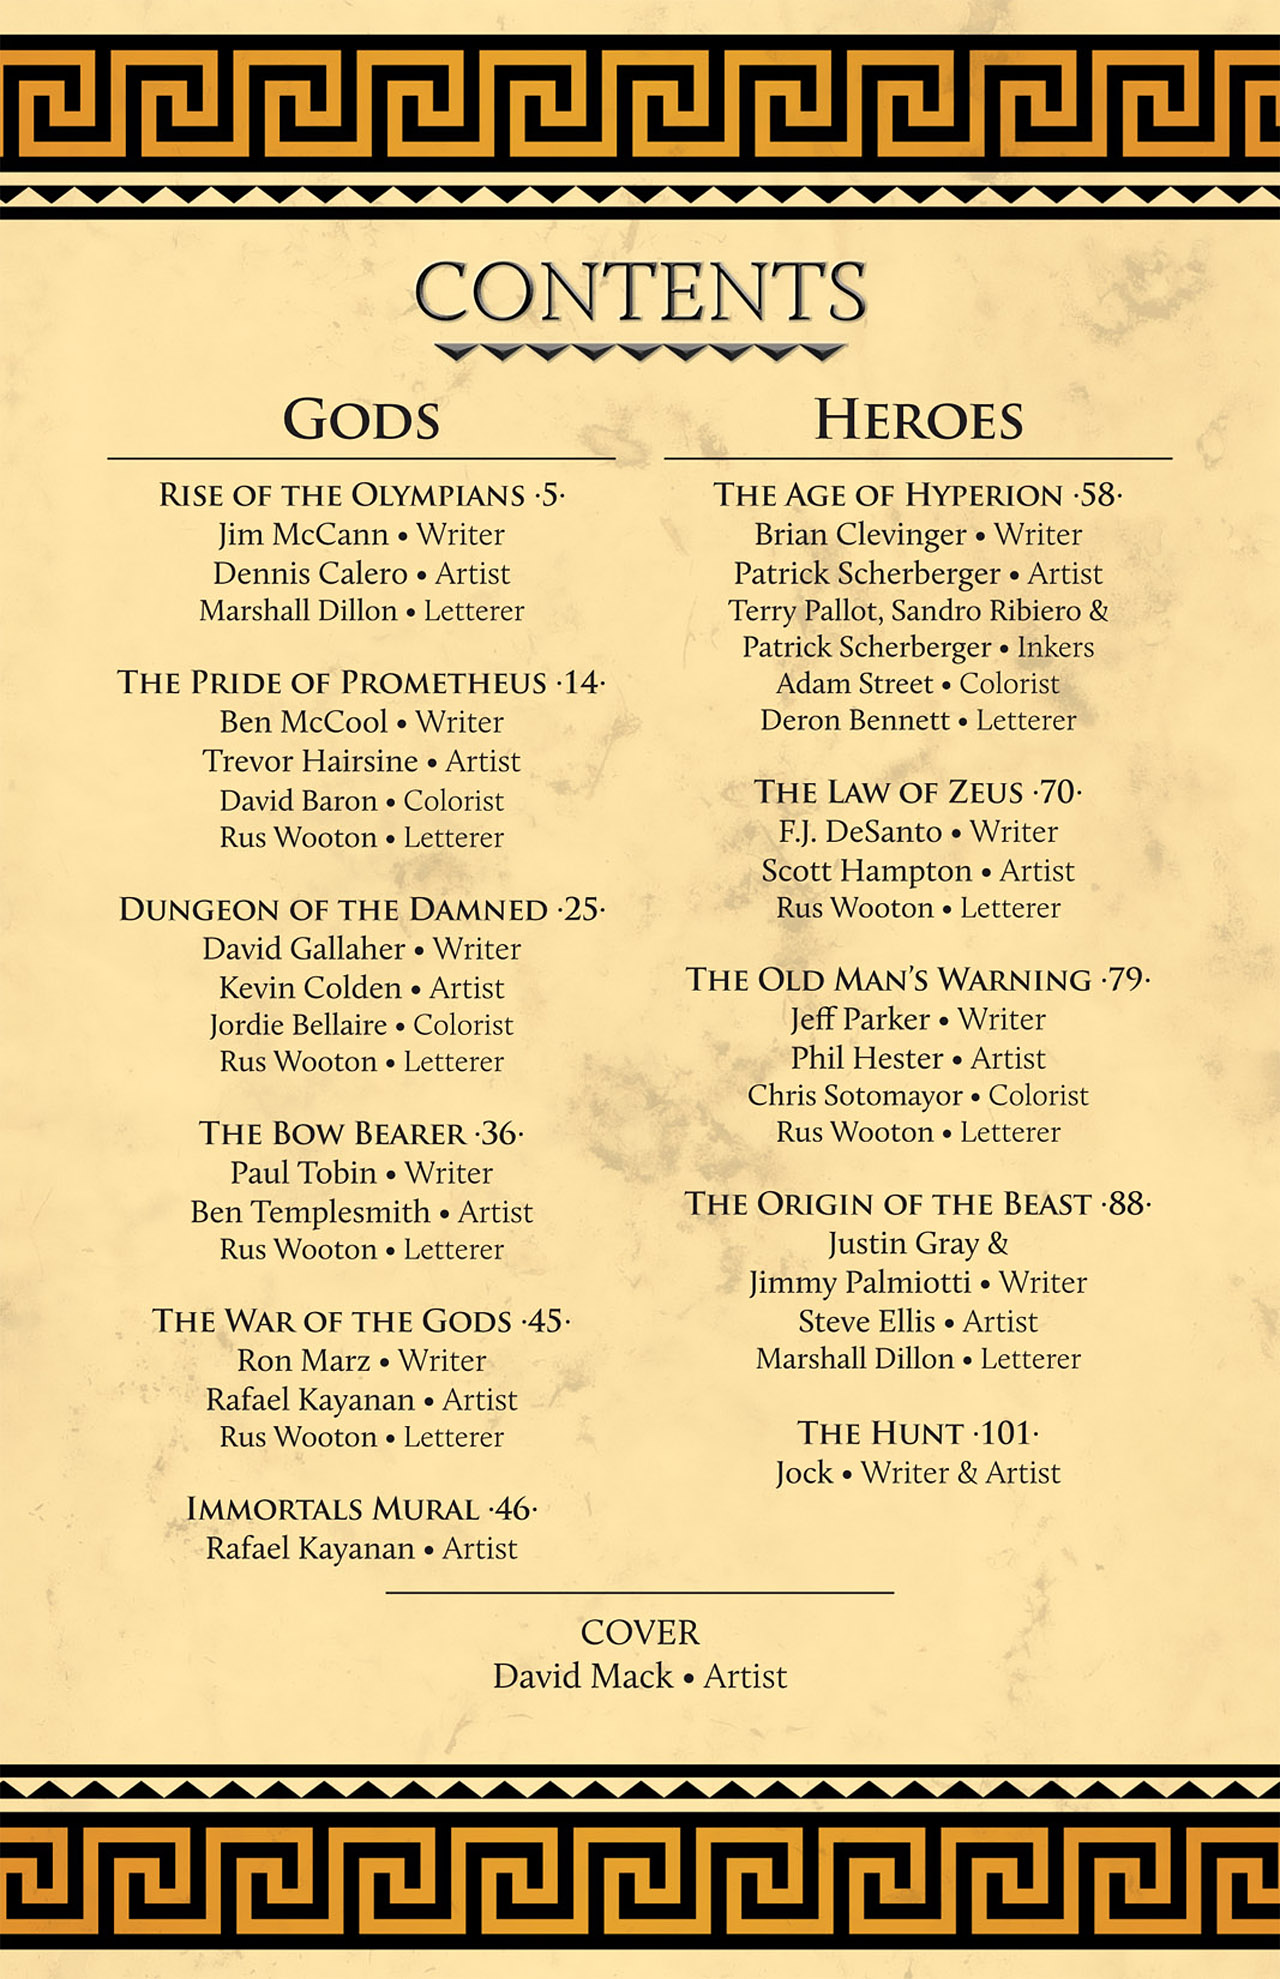 Read online Immortals: Gods and Heroes comic -  Issue # TPB - 6